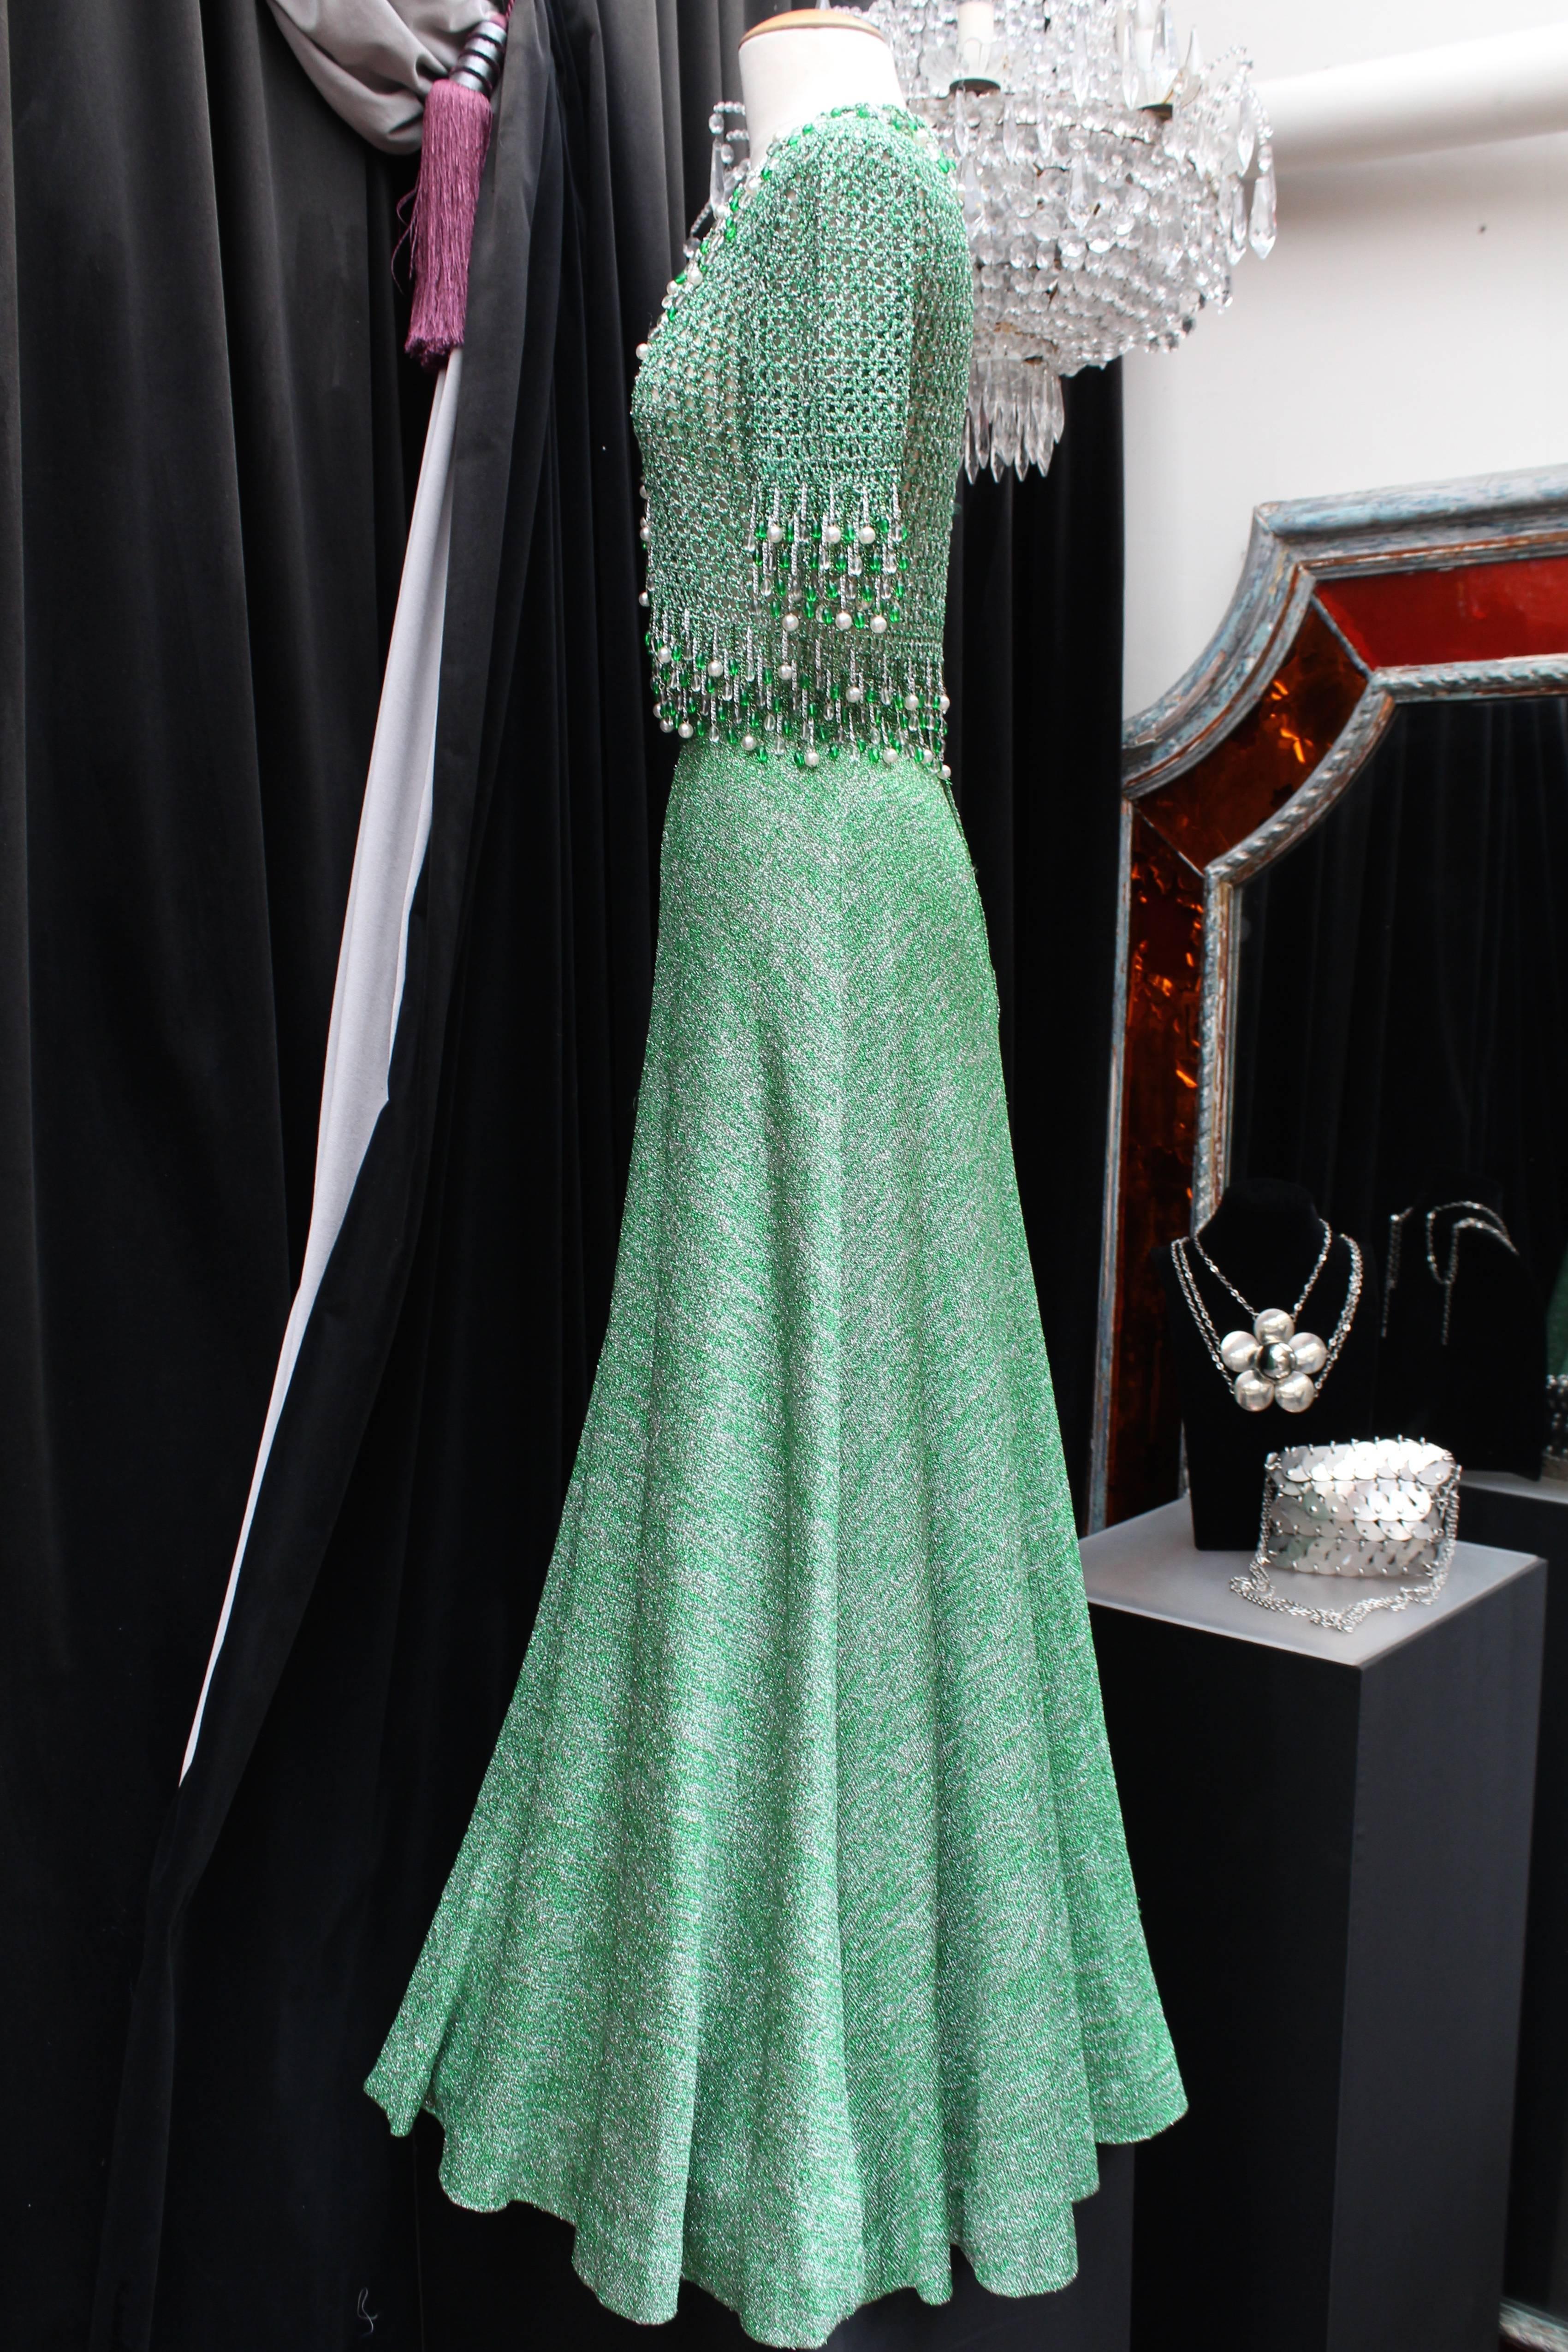 LORIS AZZARO (Made in France) Set consisting of a long skirt and a jacket in green and silver lurex crochet, dating from the 1970s.

The vest with short sleeves and V-neck, is constructed with a large mesh crochet in lurex and adorned on the